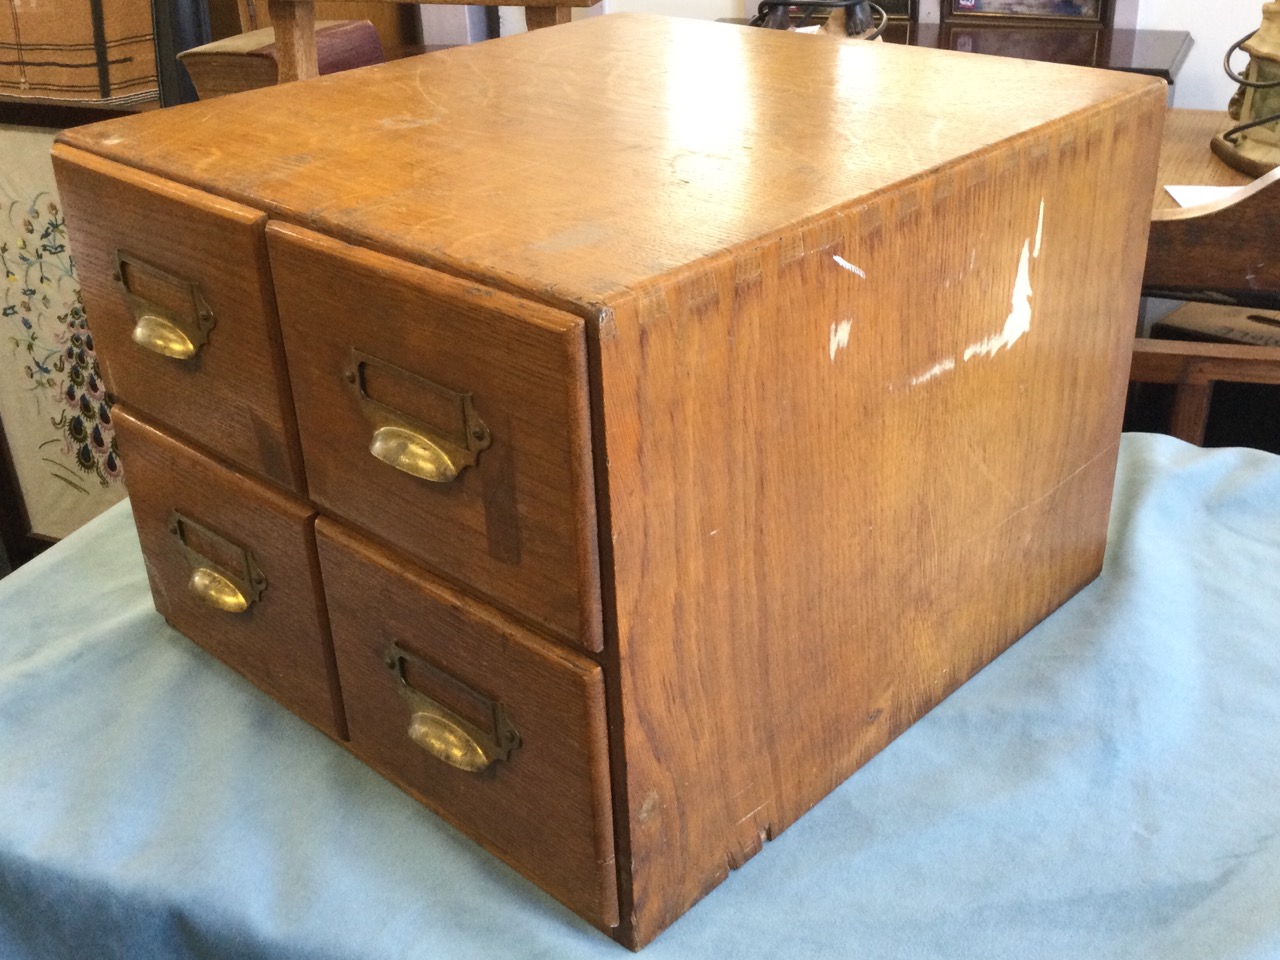 An Edwardian oak card index cabinet, with four drawers mounted with brass cup handles and label- - Image 3 of 3